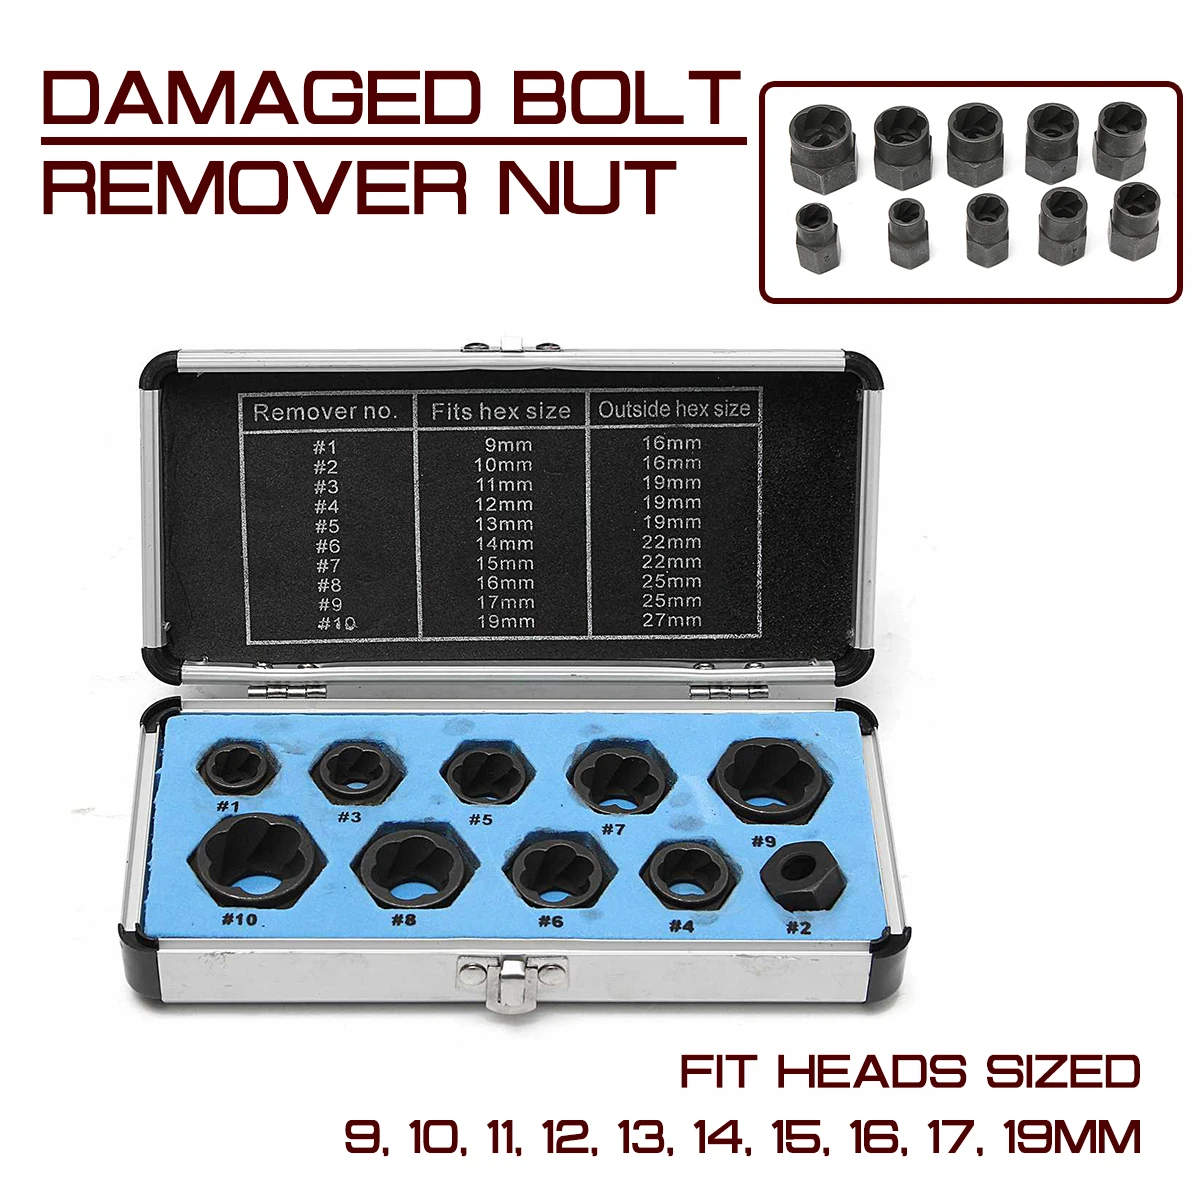 

10 pcs/set Damaged Bolt Nut Screw Remover Extractor Removal Set Threading Hand Tools Kit With Box Cased Nut Removal Socket Tool